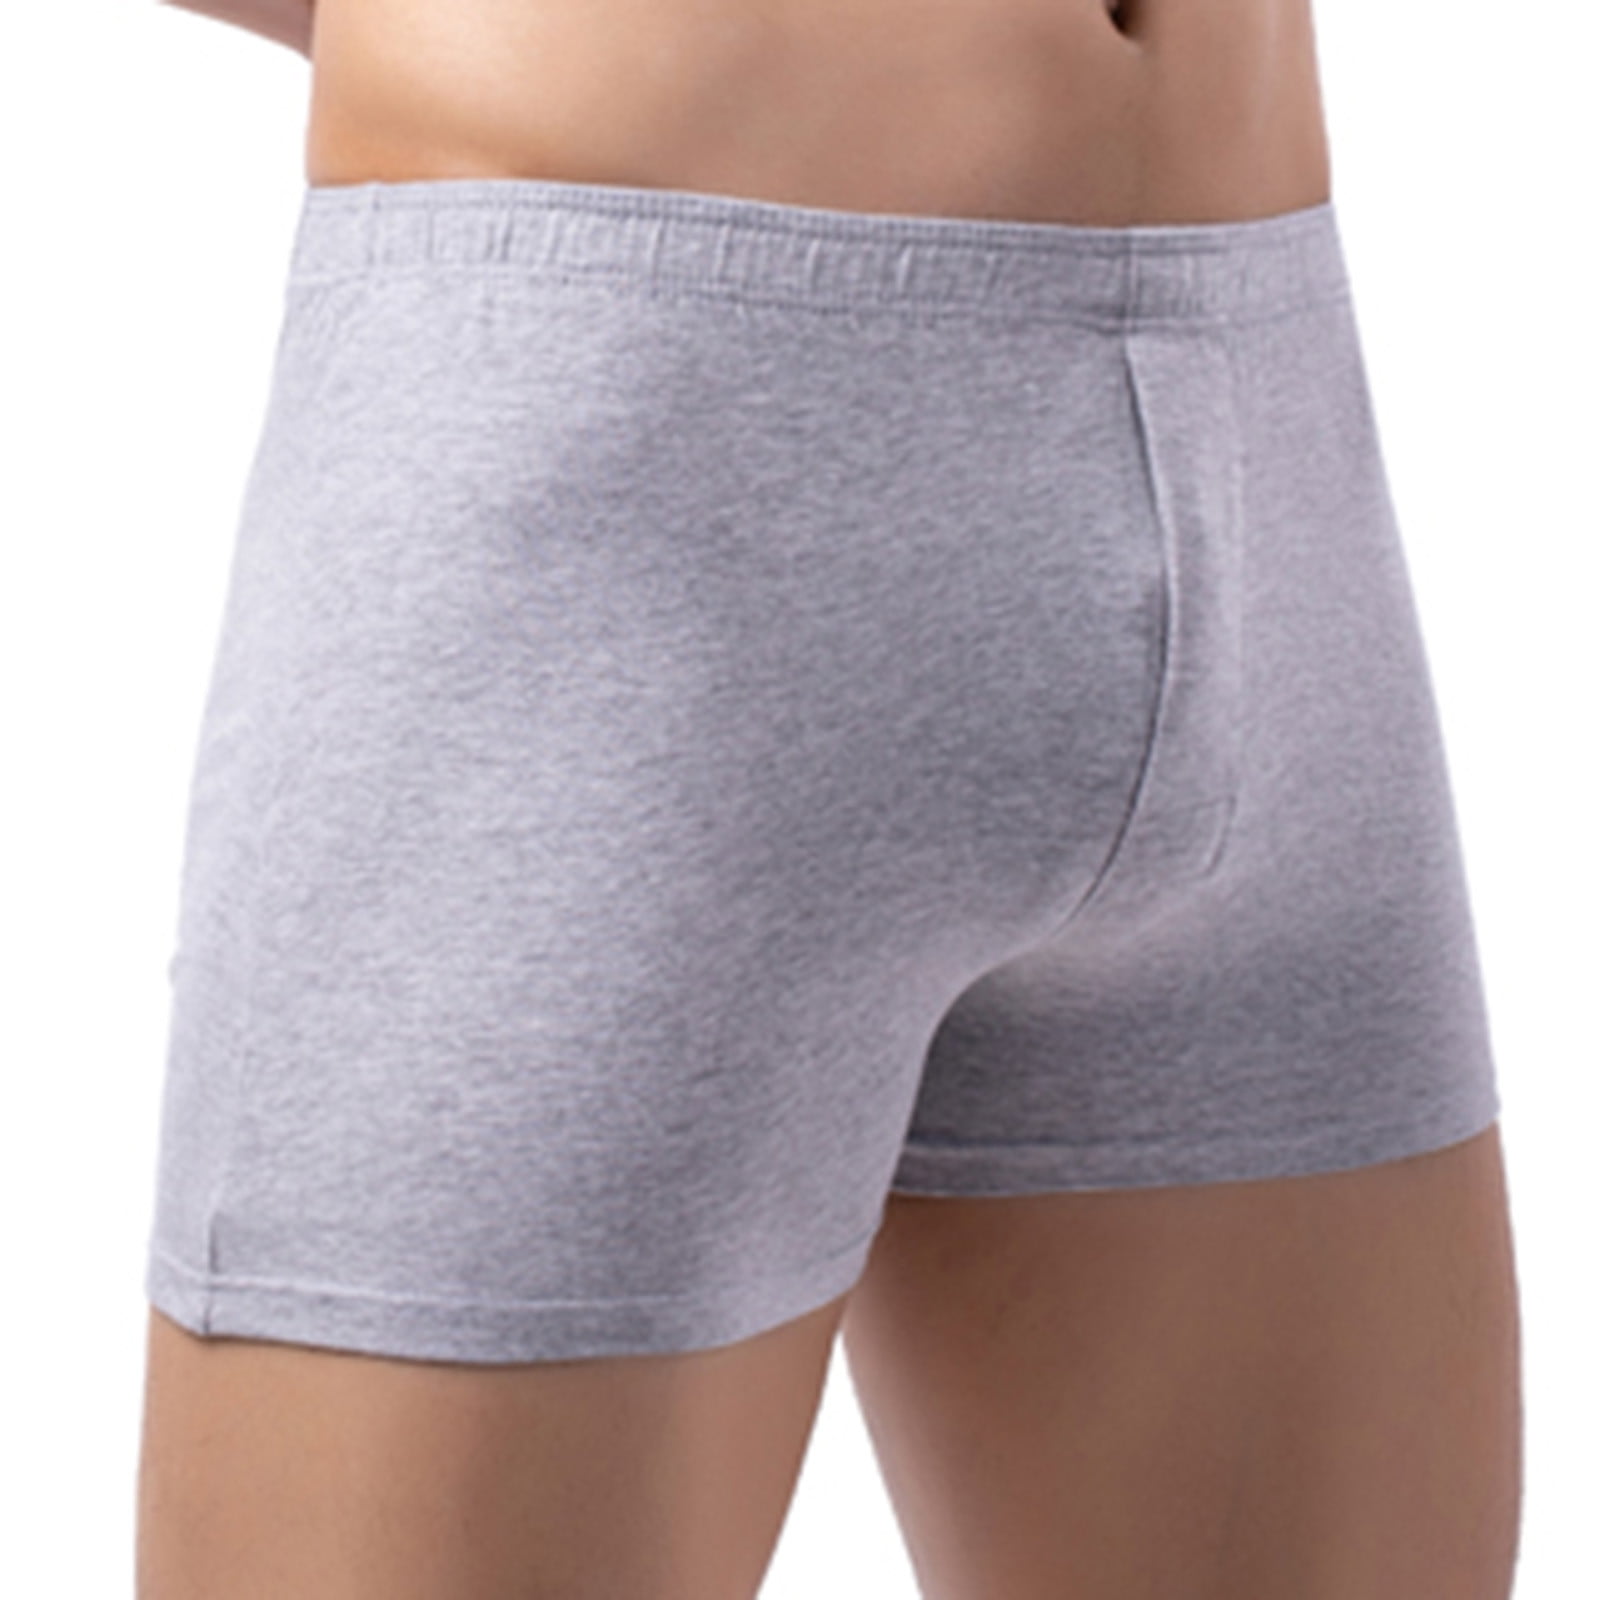 QIPOPIQ Mens Underwear Casual Solid Sexy Elastic-waisted Boxers